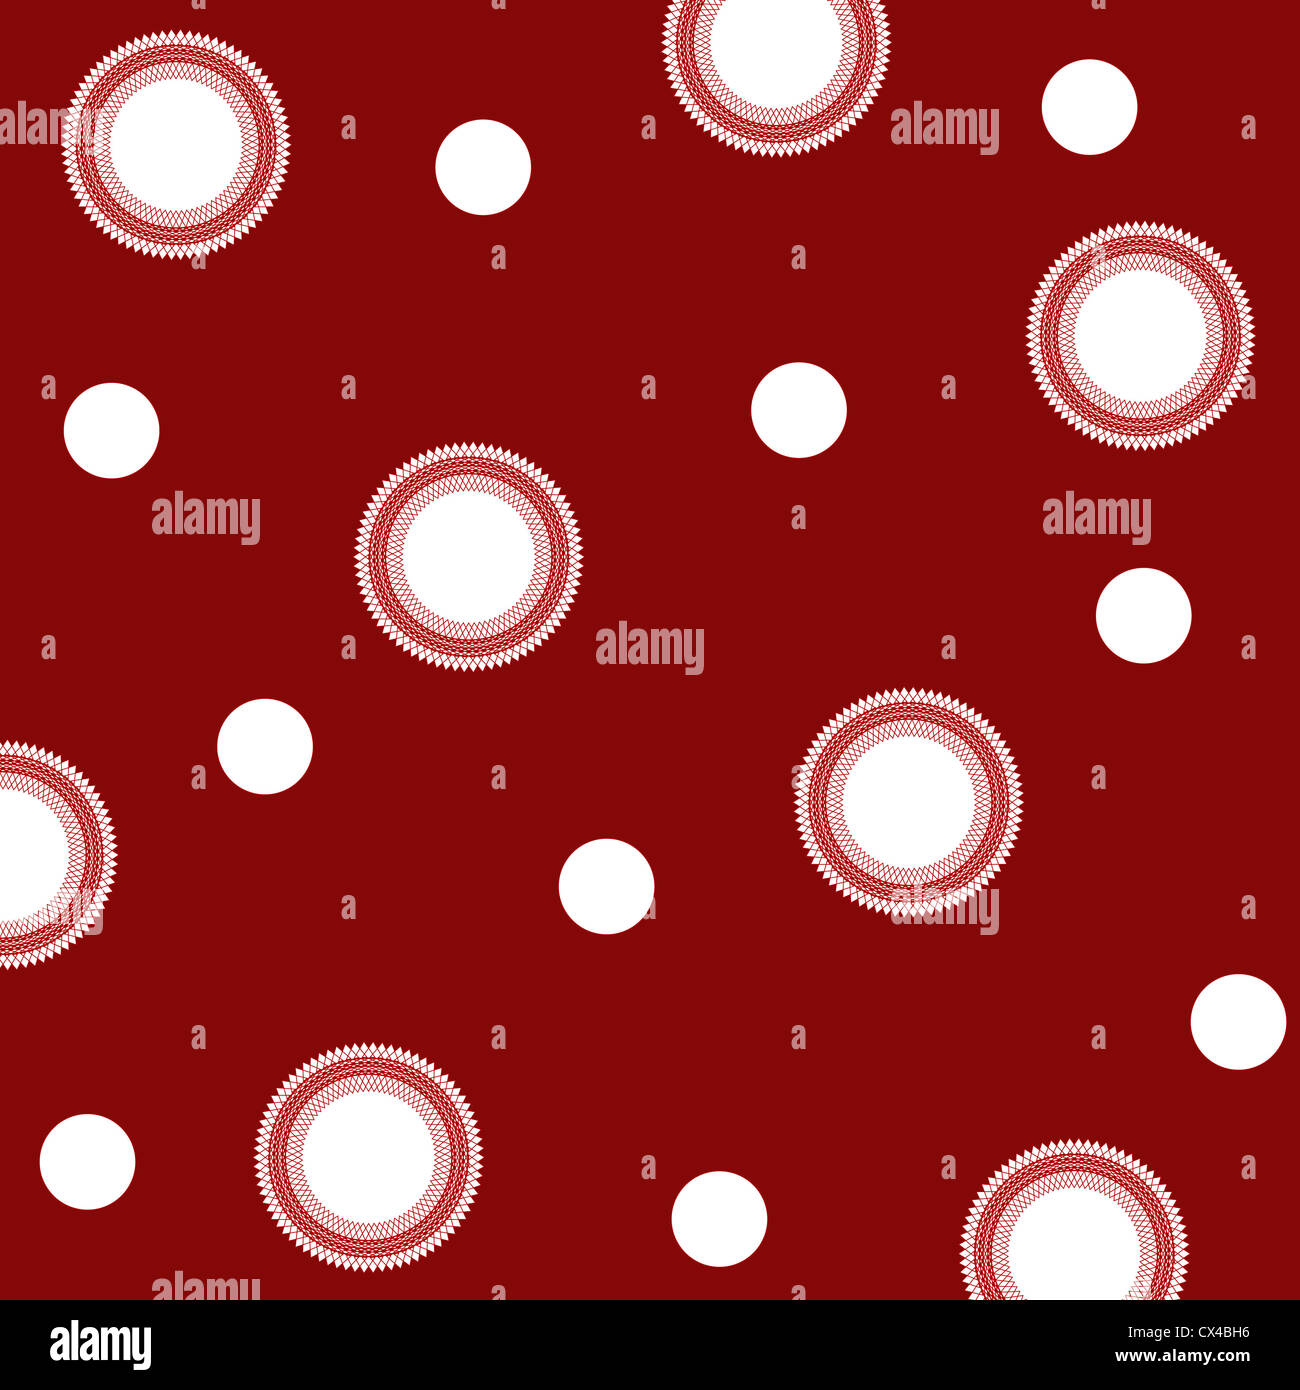 Artistic circles pattern in white on red Stock Photo